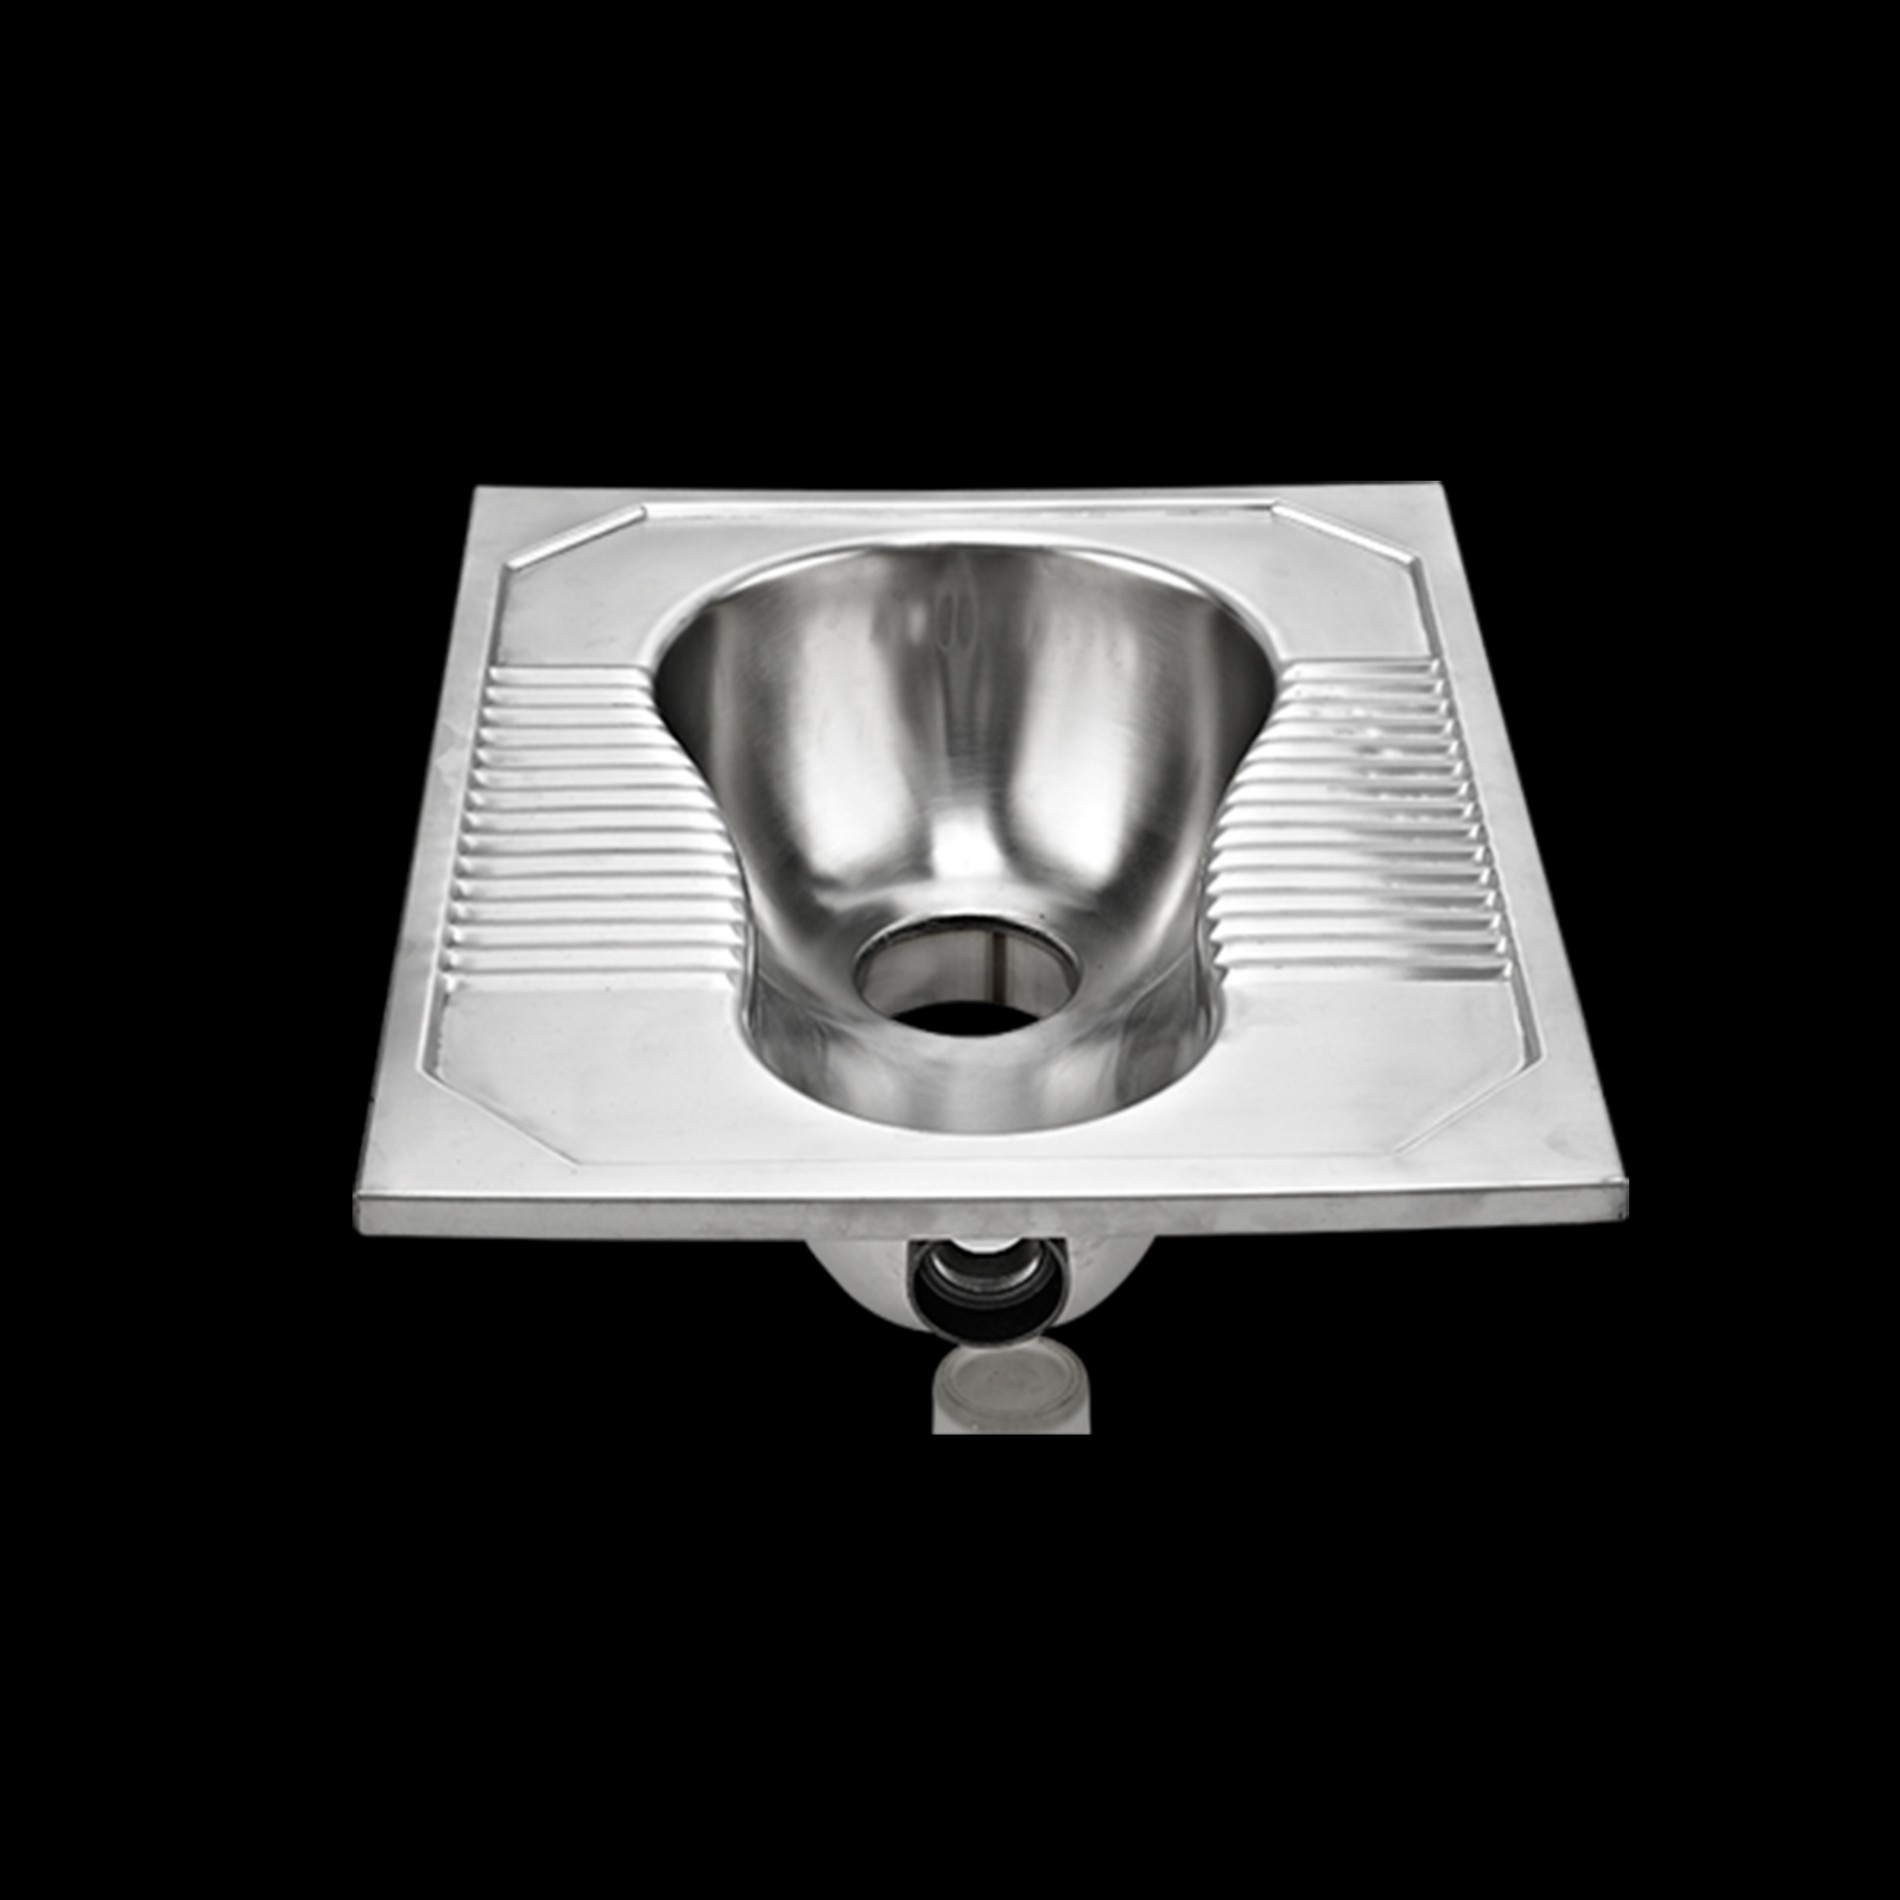 Stainless Steel Squat Toilet Without Nozzle